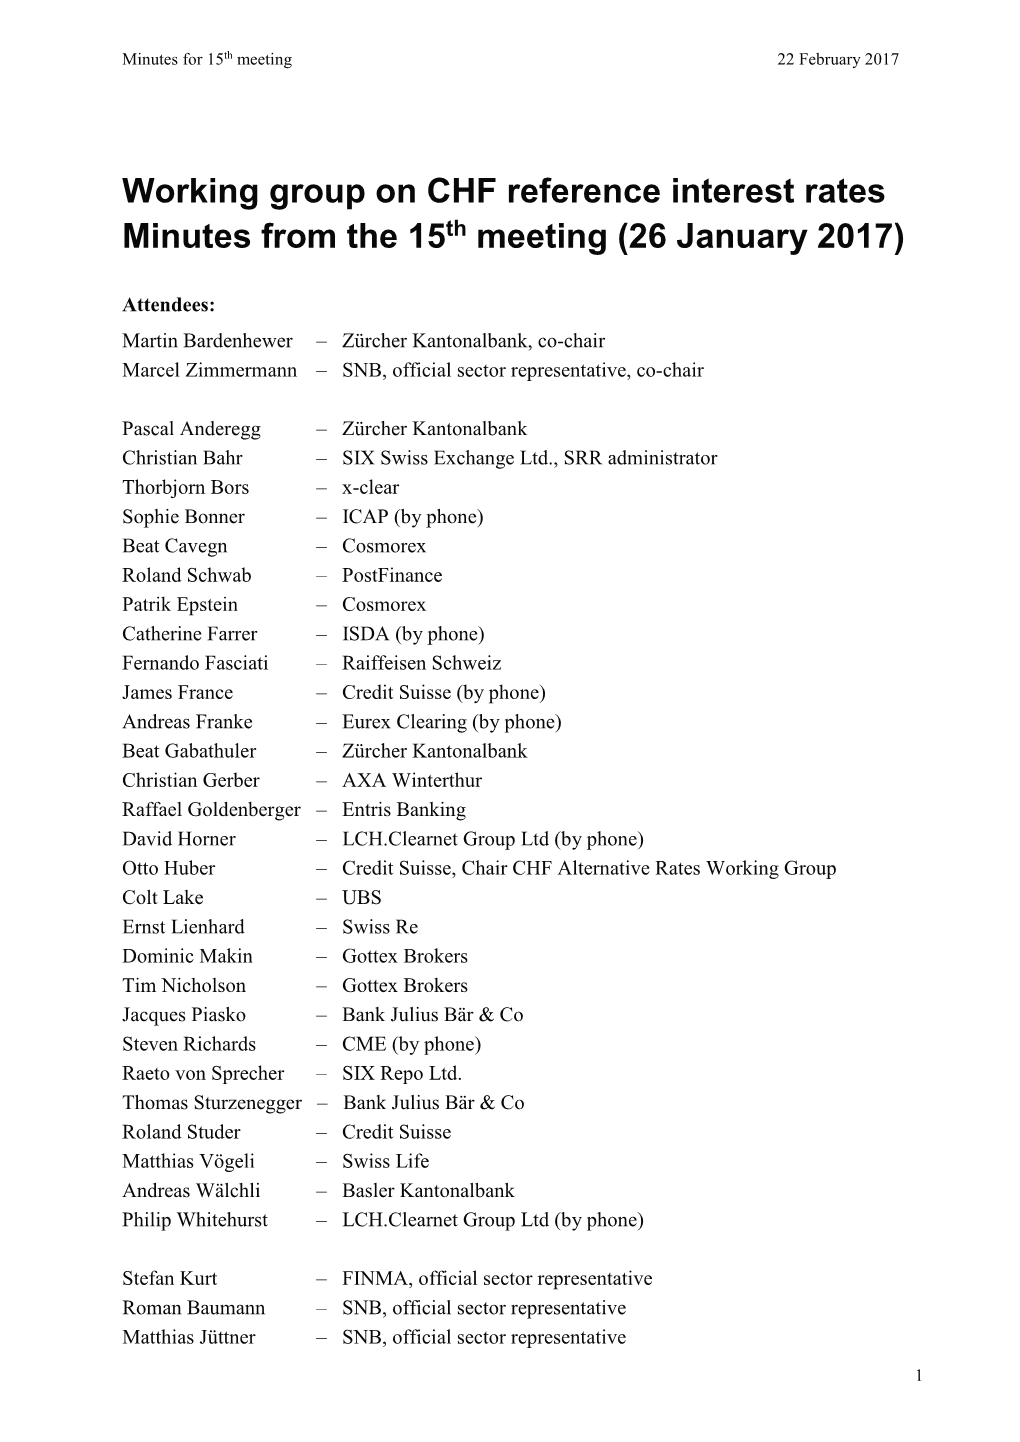 Working Group on CHF Reference Interest Rates Minutes from the 15Th Meeting (26 January 2017)